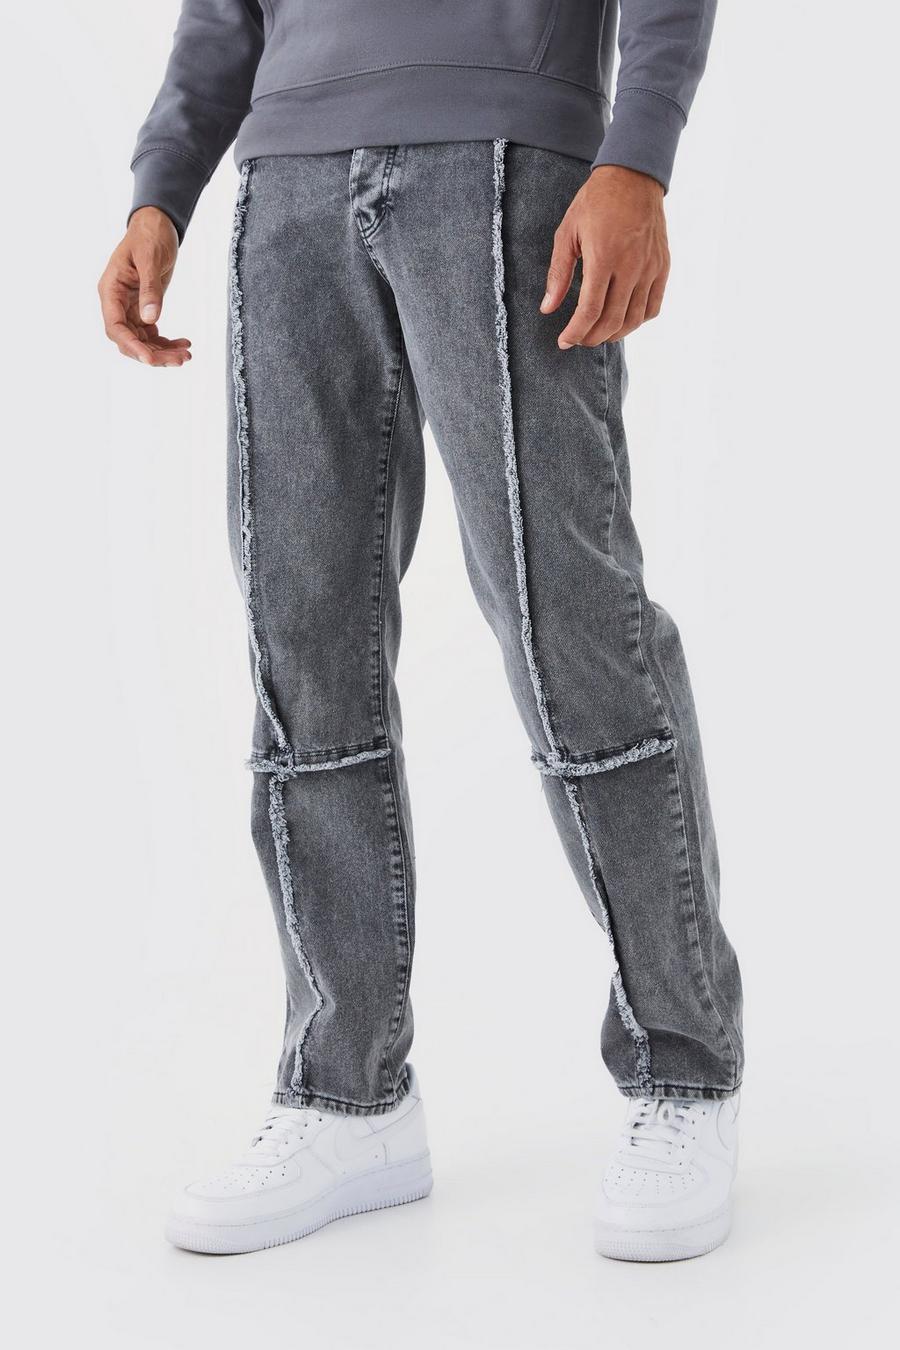 Charcoal grey Relaxed Rigid Distressed Seam Jeans